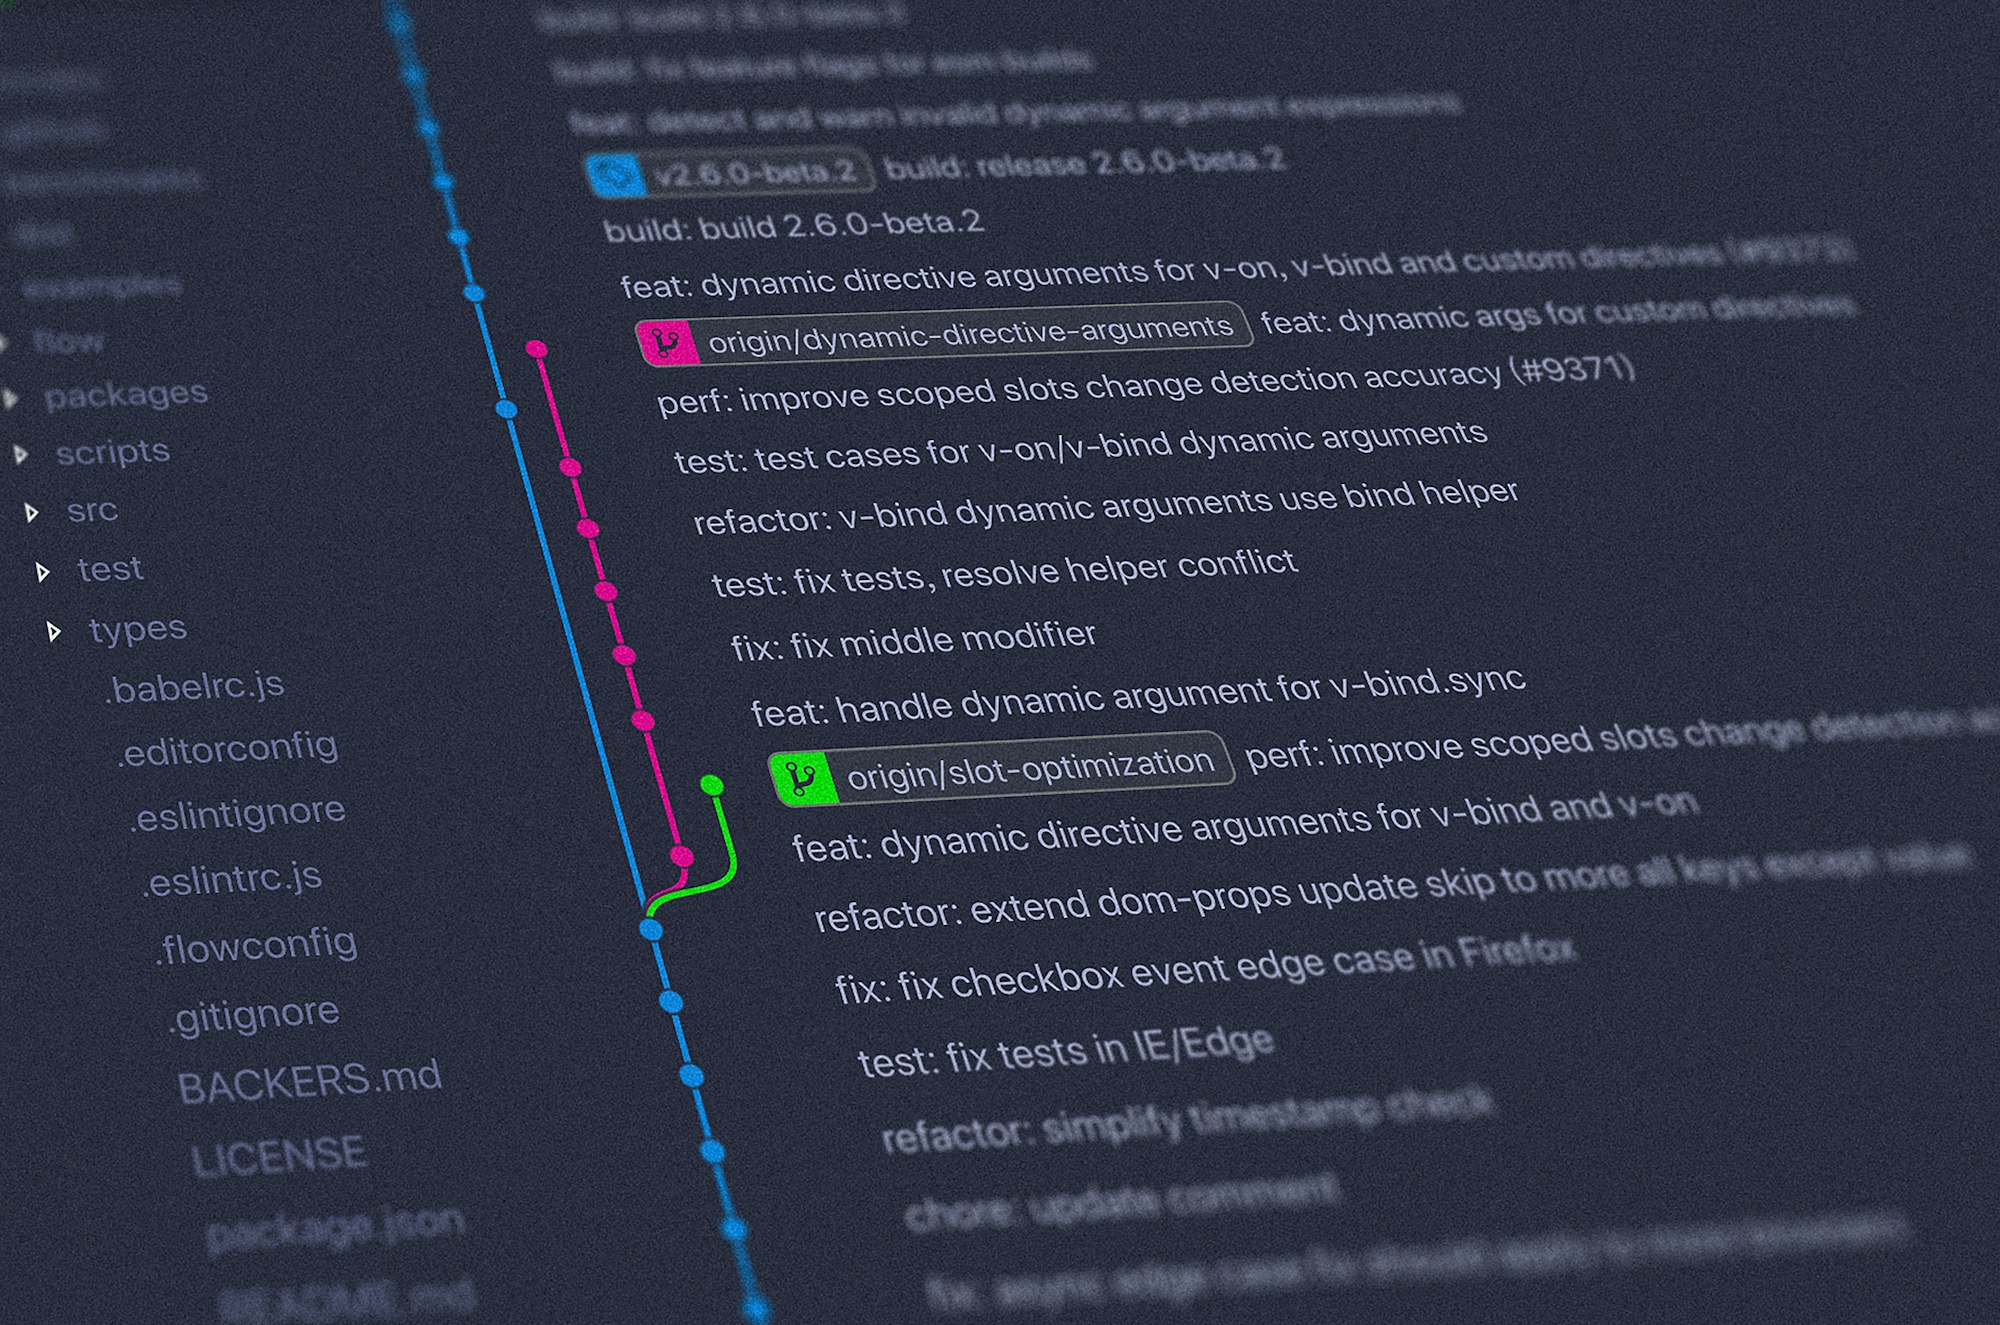 The workflow with Git